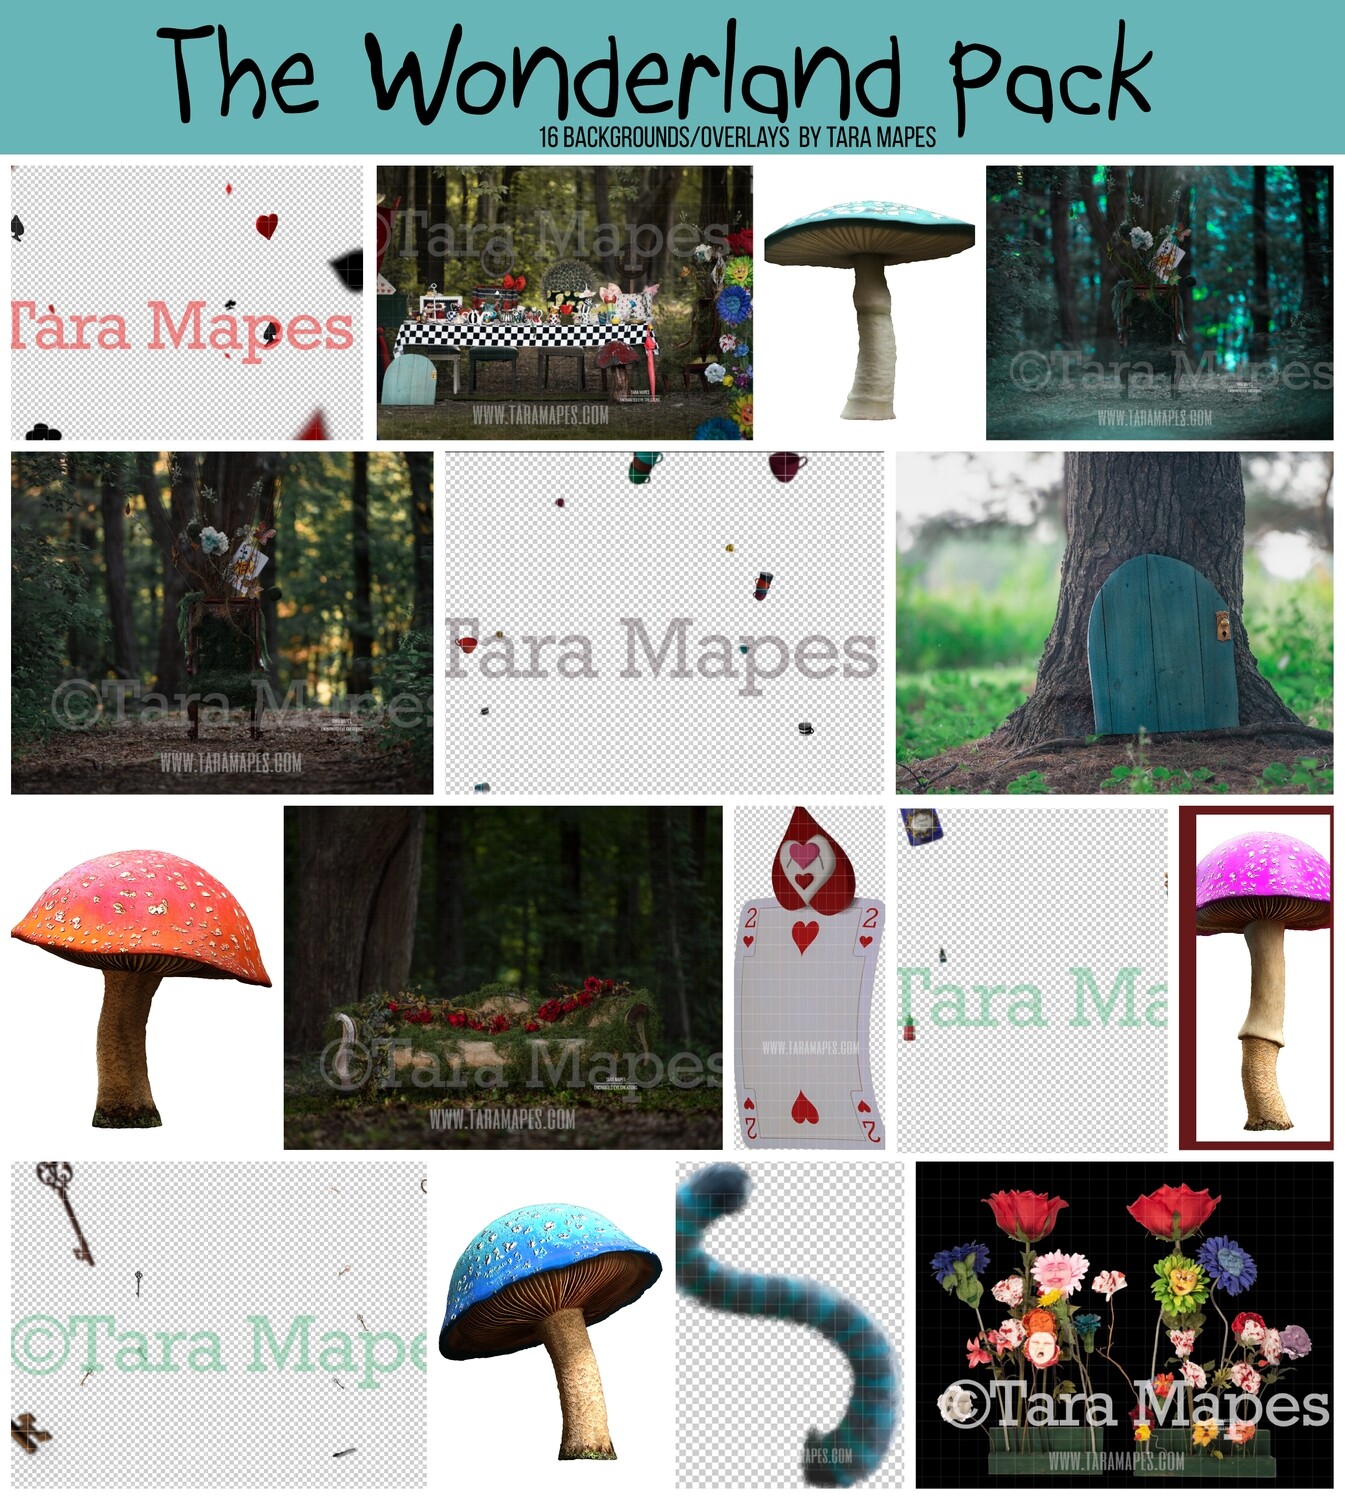 The Wonderland Pack by Tara Mapes - Alice in Wonderland Inspired Digital Backgrounds and Overlays